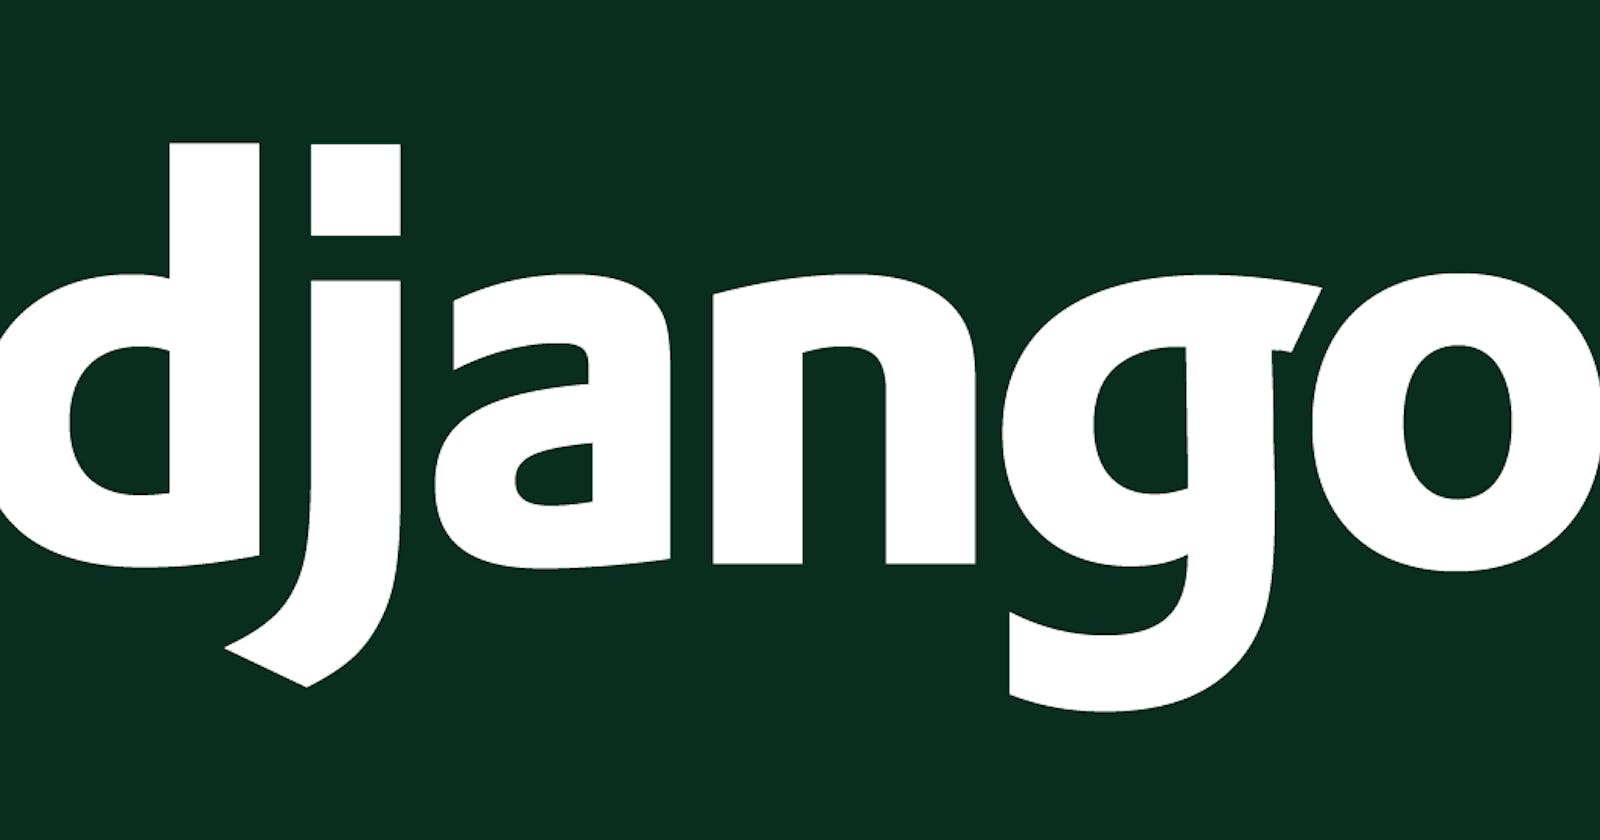 Getting Started With Django And It's Anatomy (Part 1)